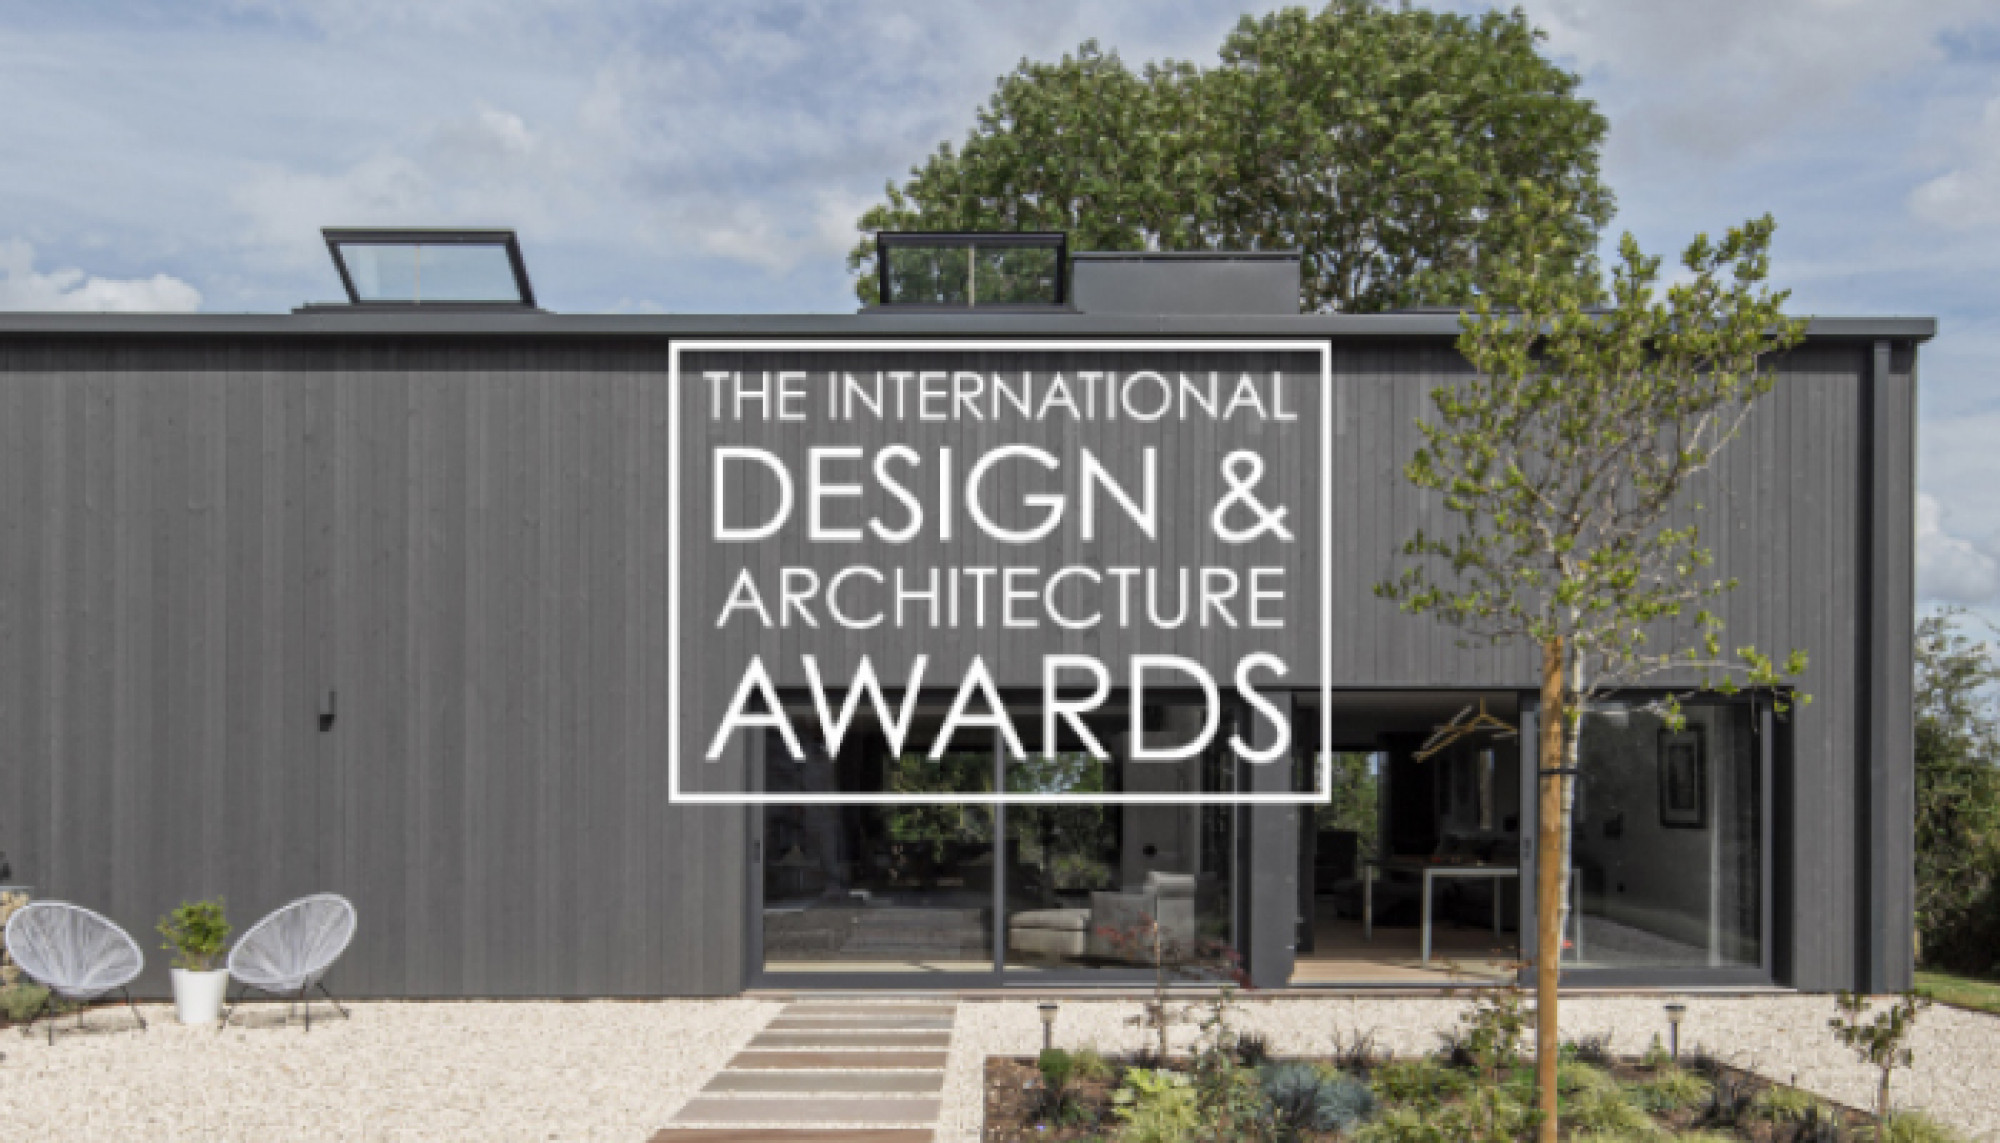 Black Barn shortlisted in The International Design and Architecture Awards 2021